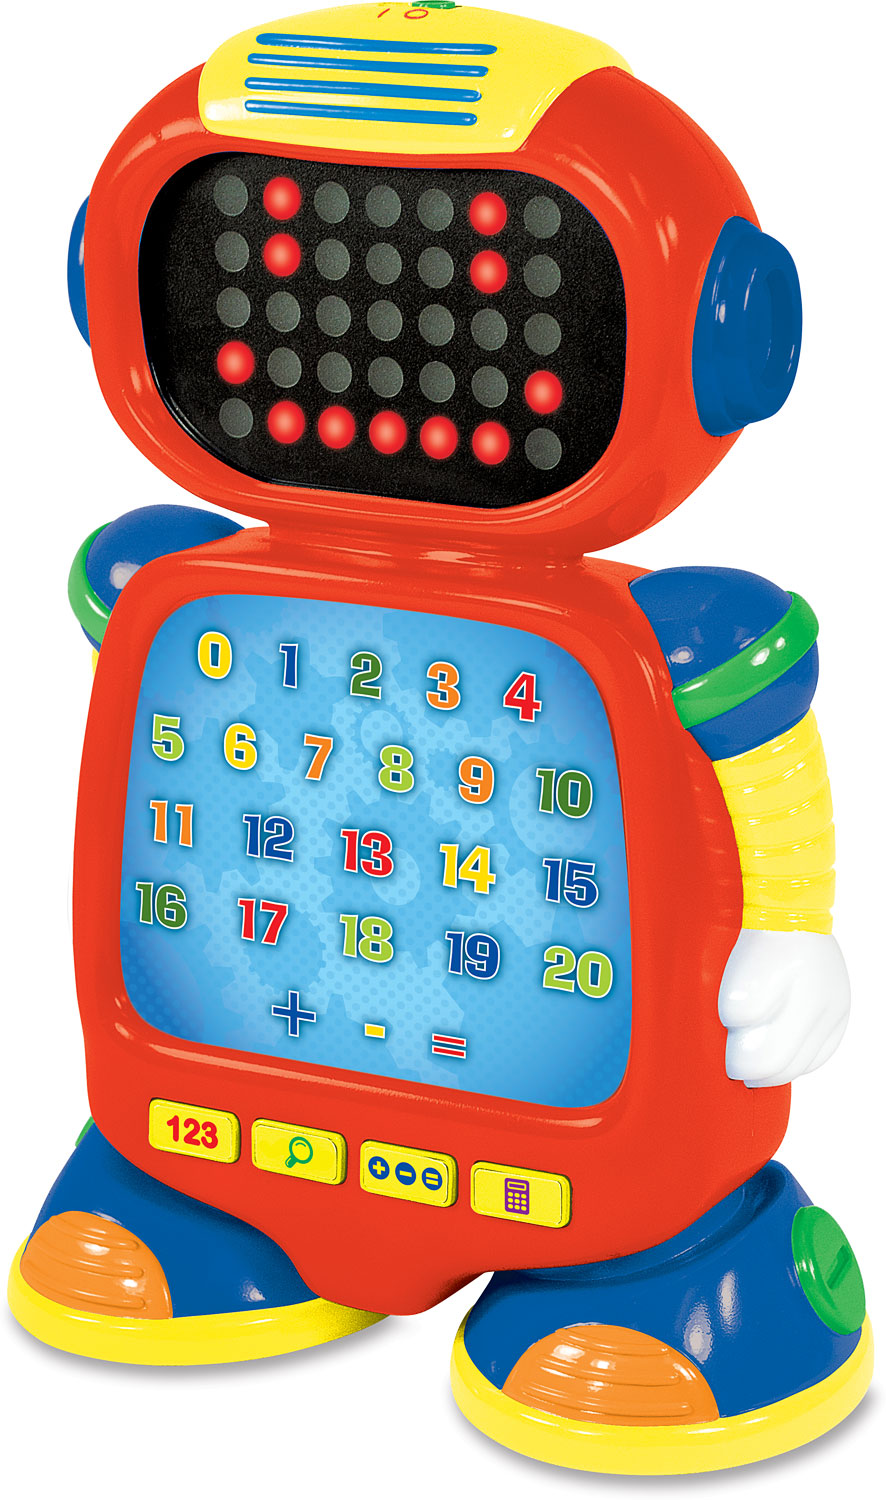 Details about   Touch and Learn NumberBot STEM educational toys Math learning 